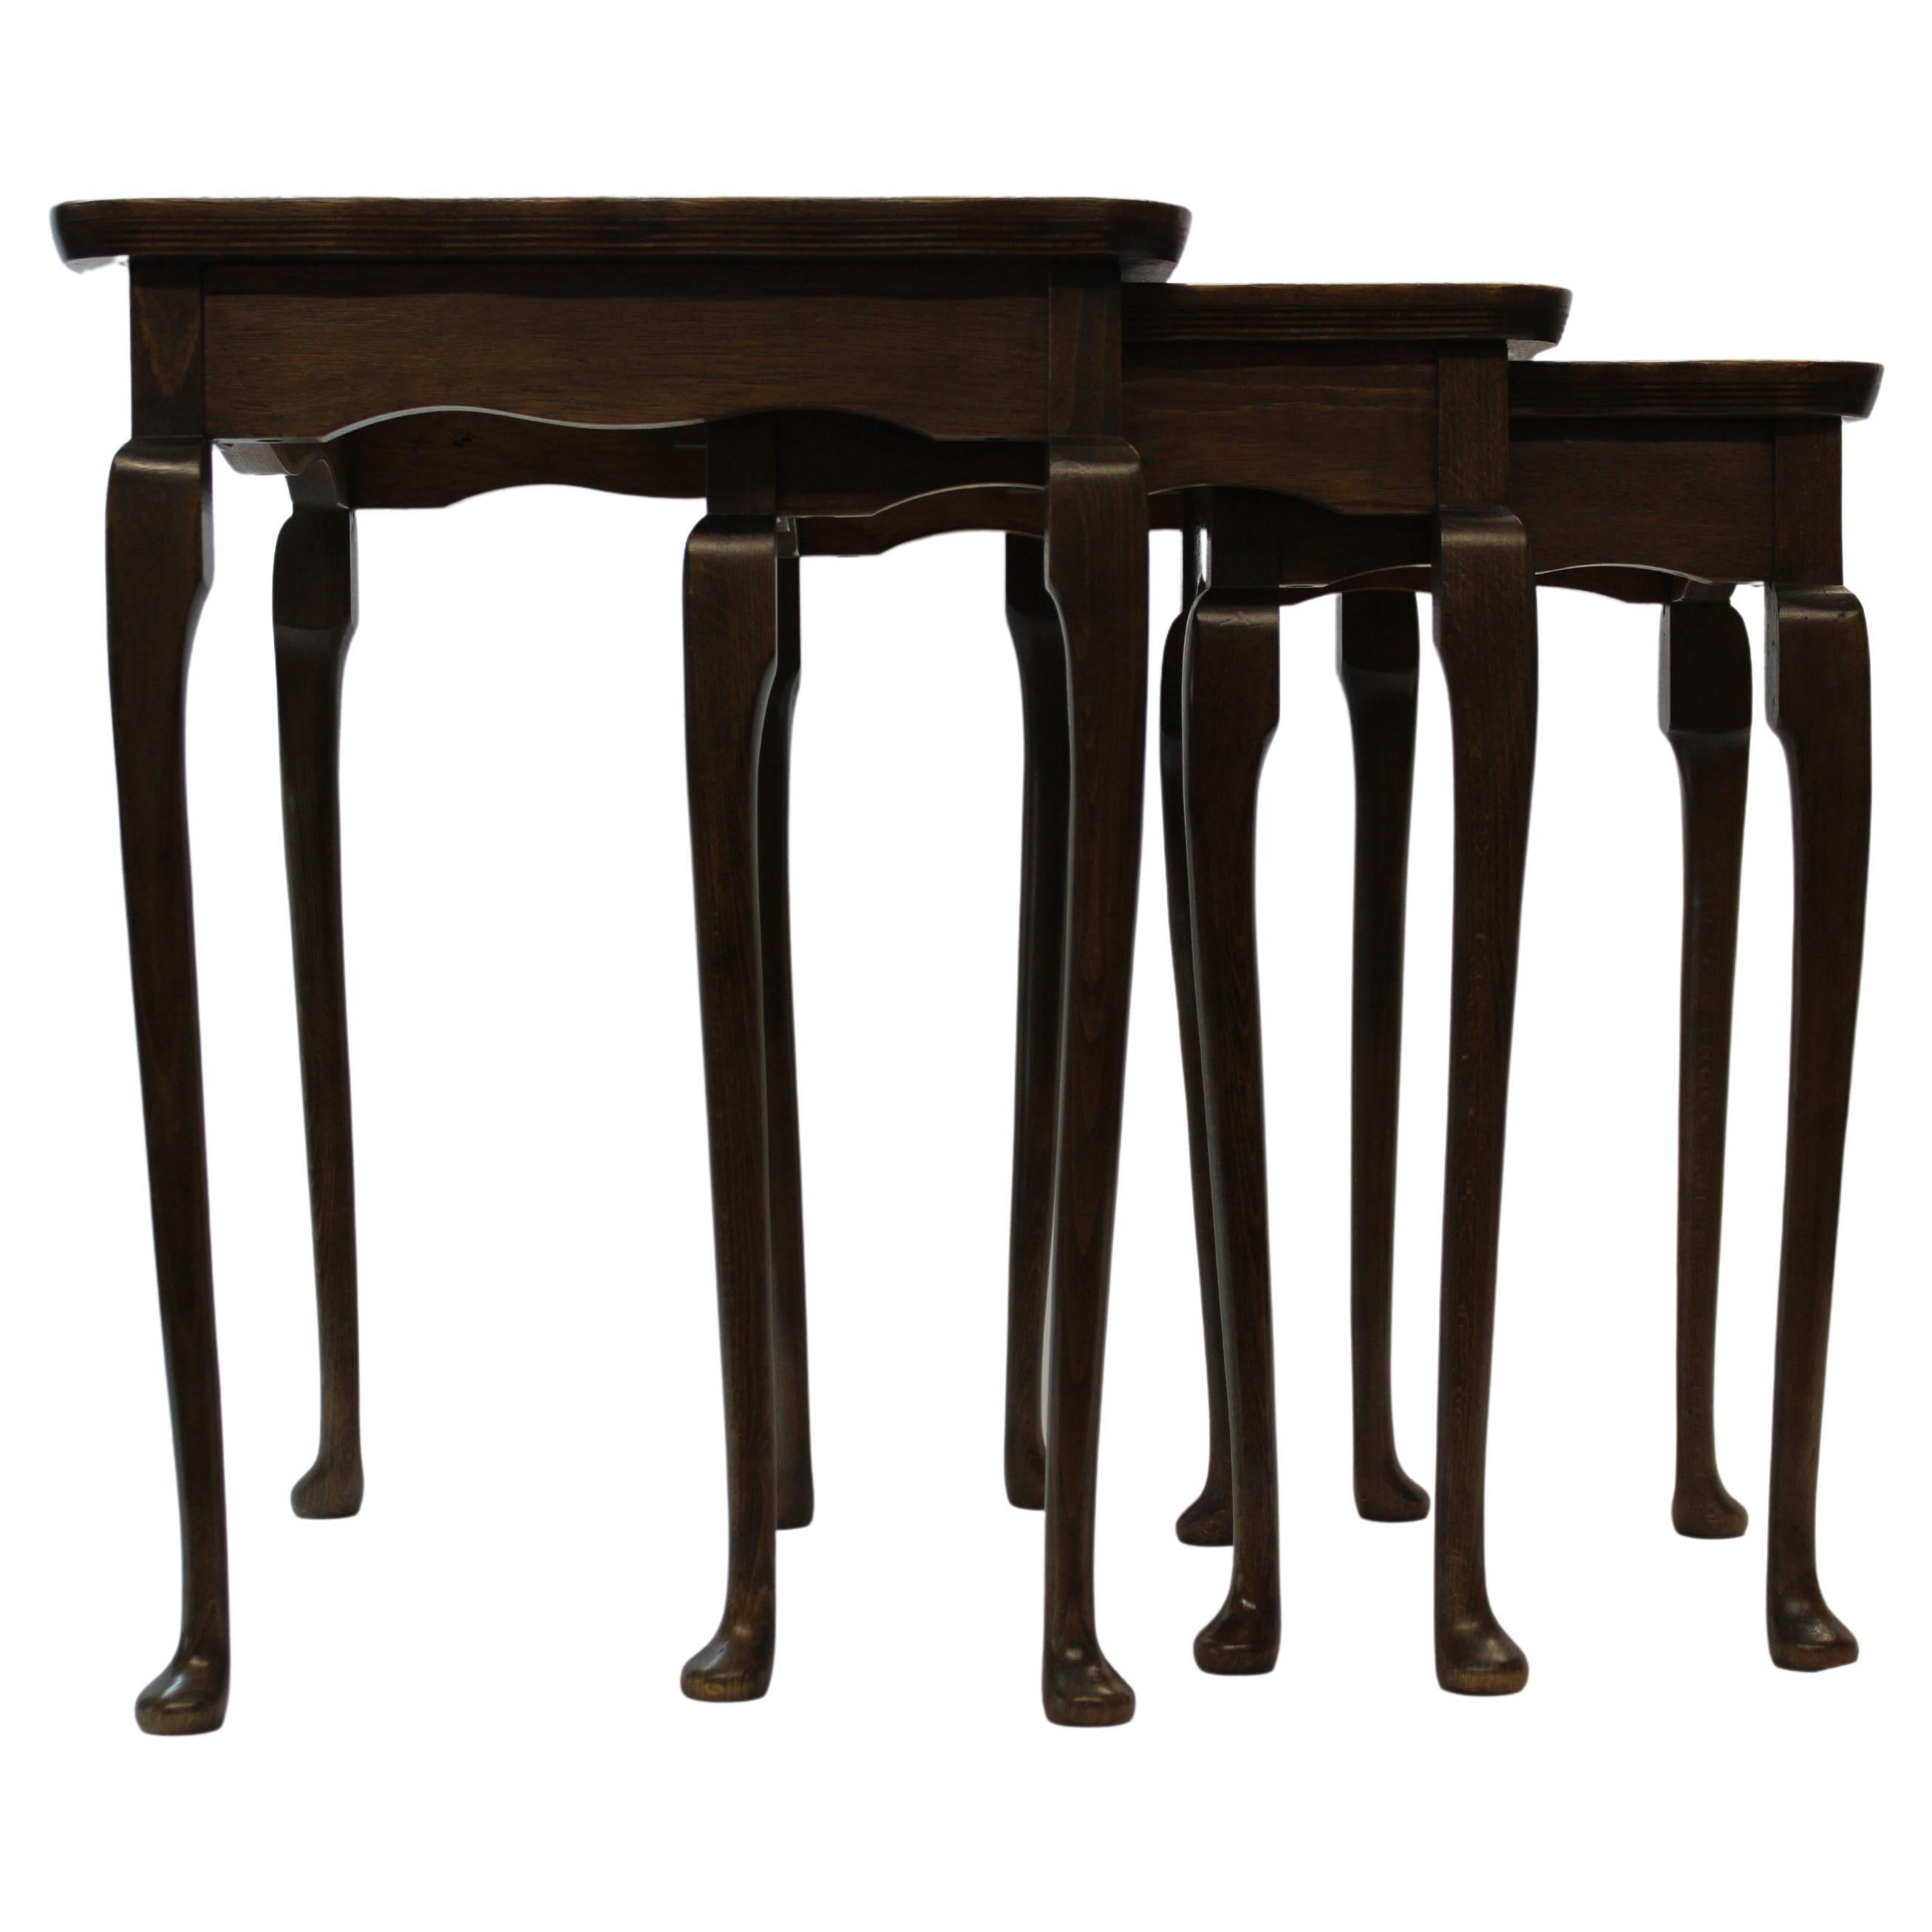 Queen Anne Styled Burled Wood Nesting Tables